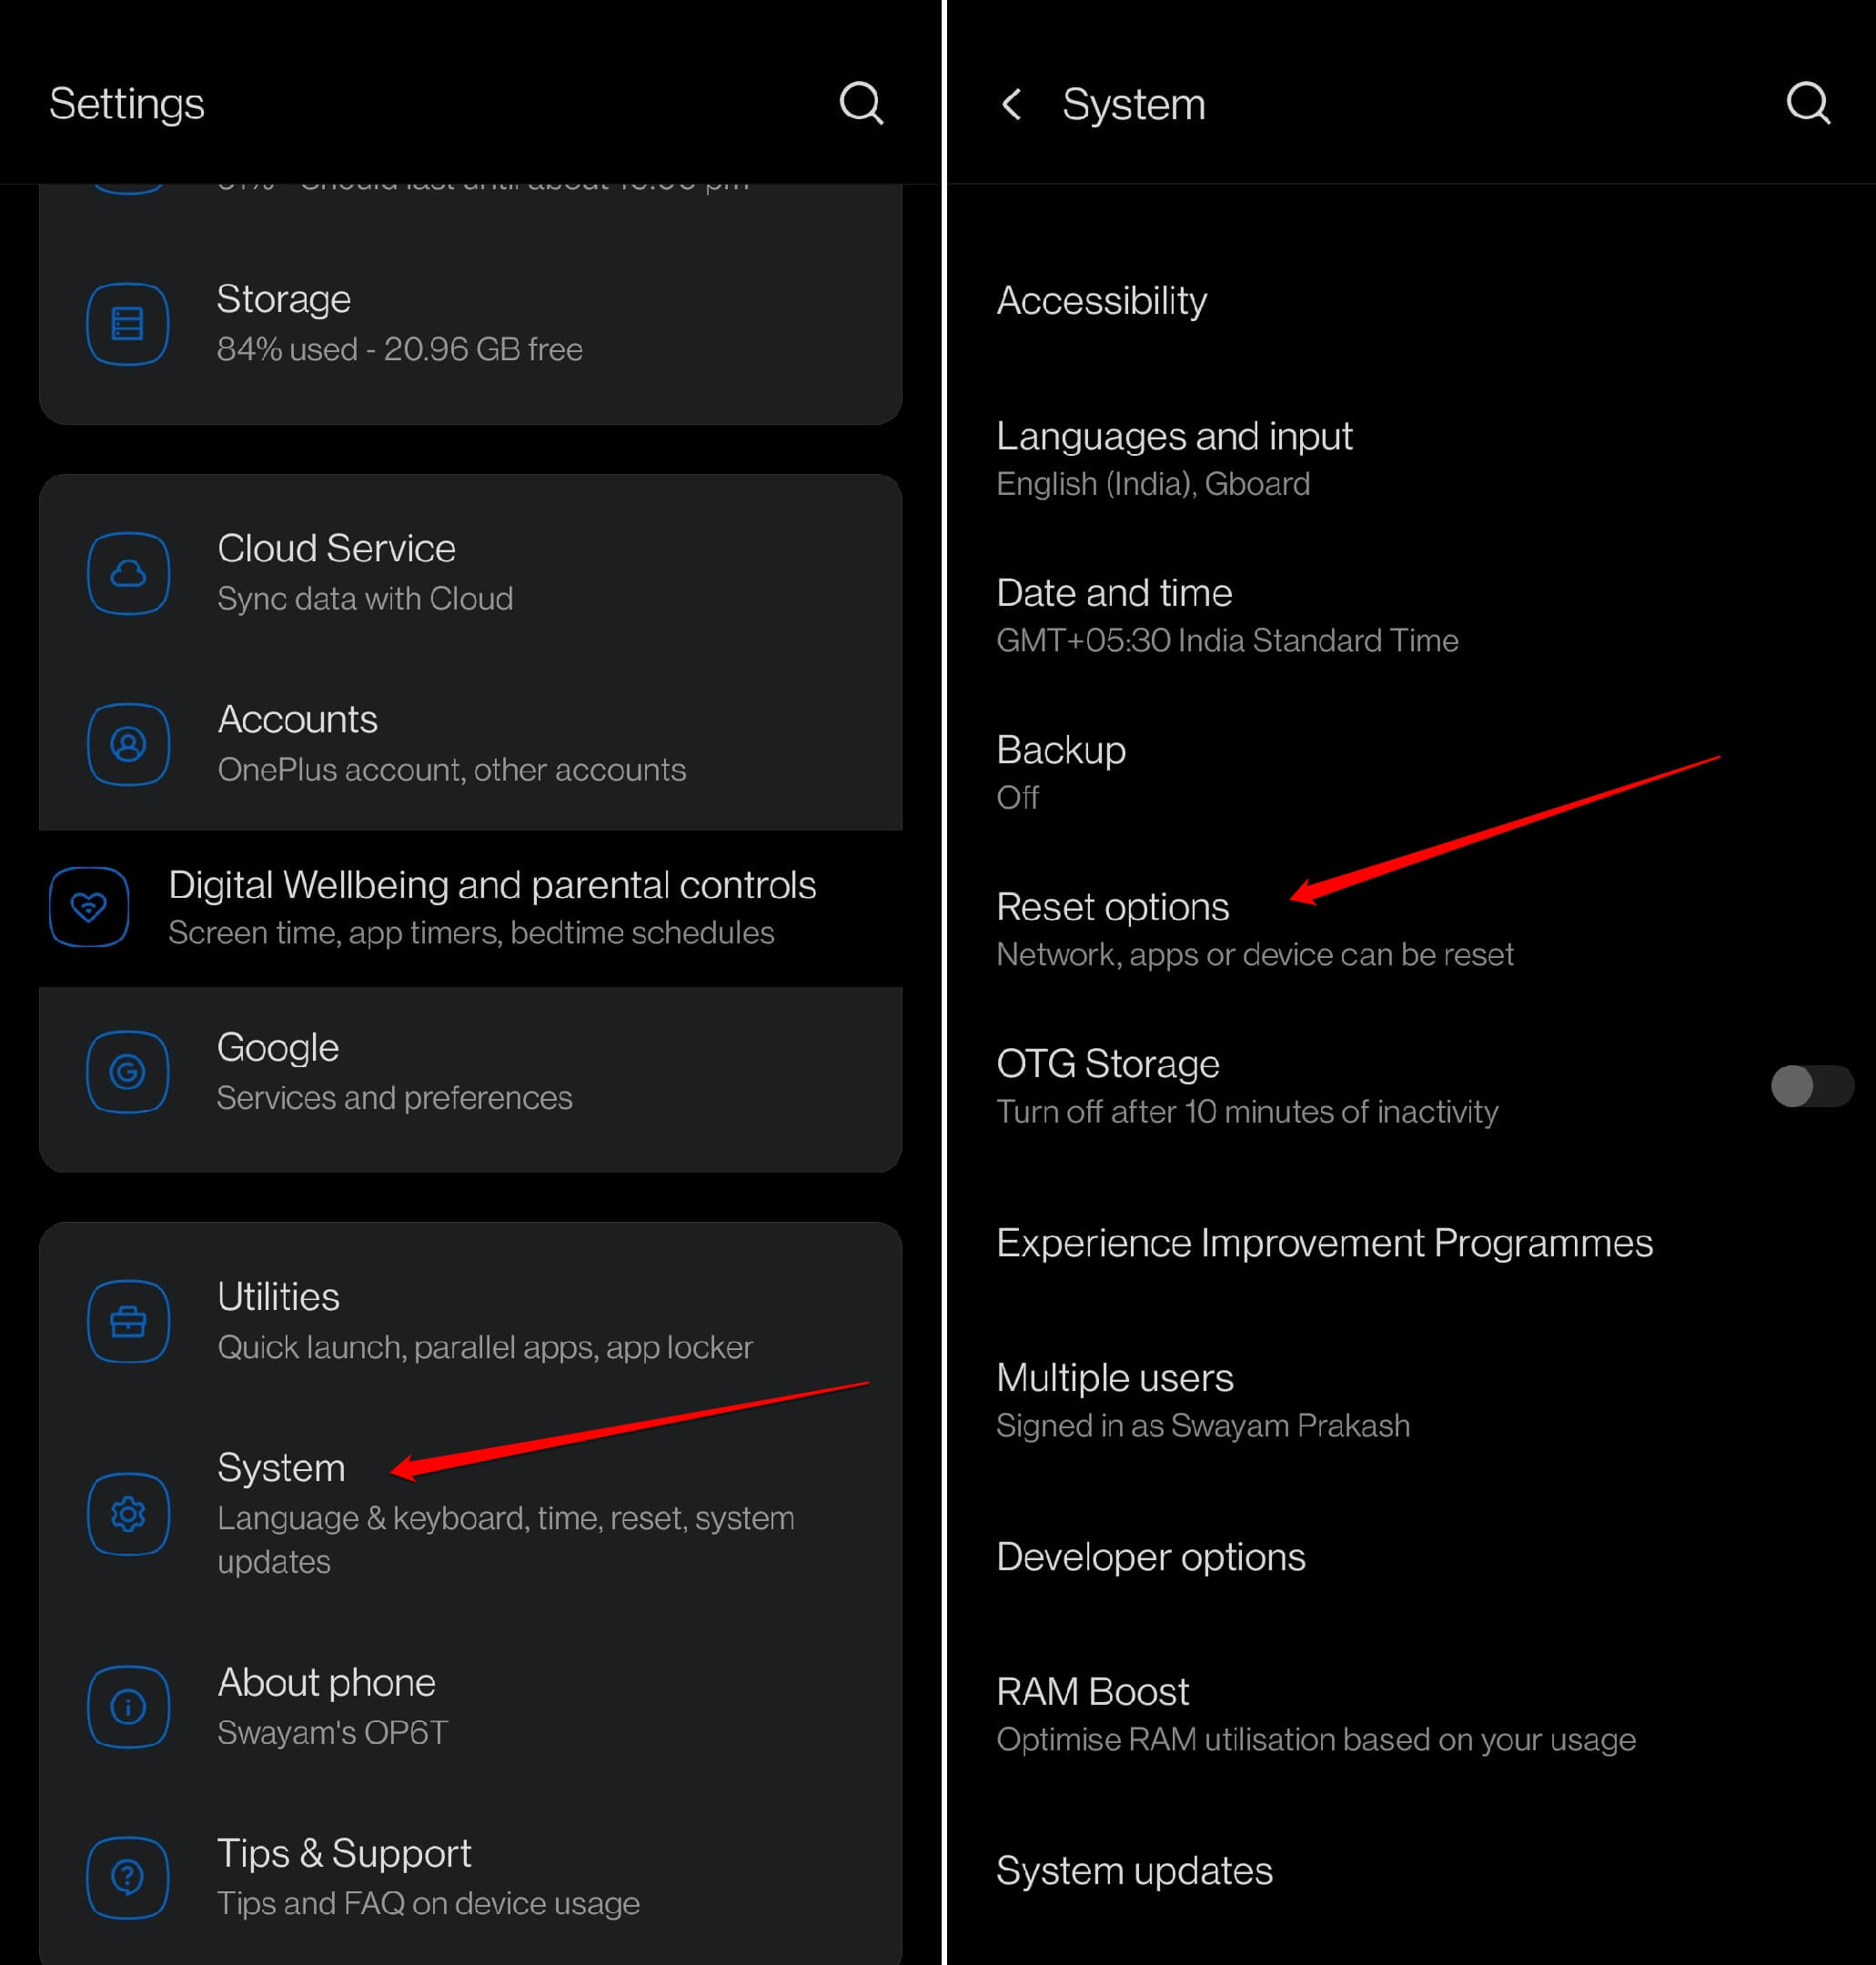 Android device reset options